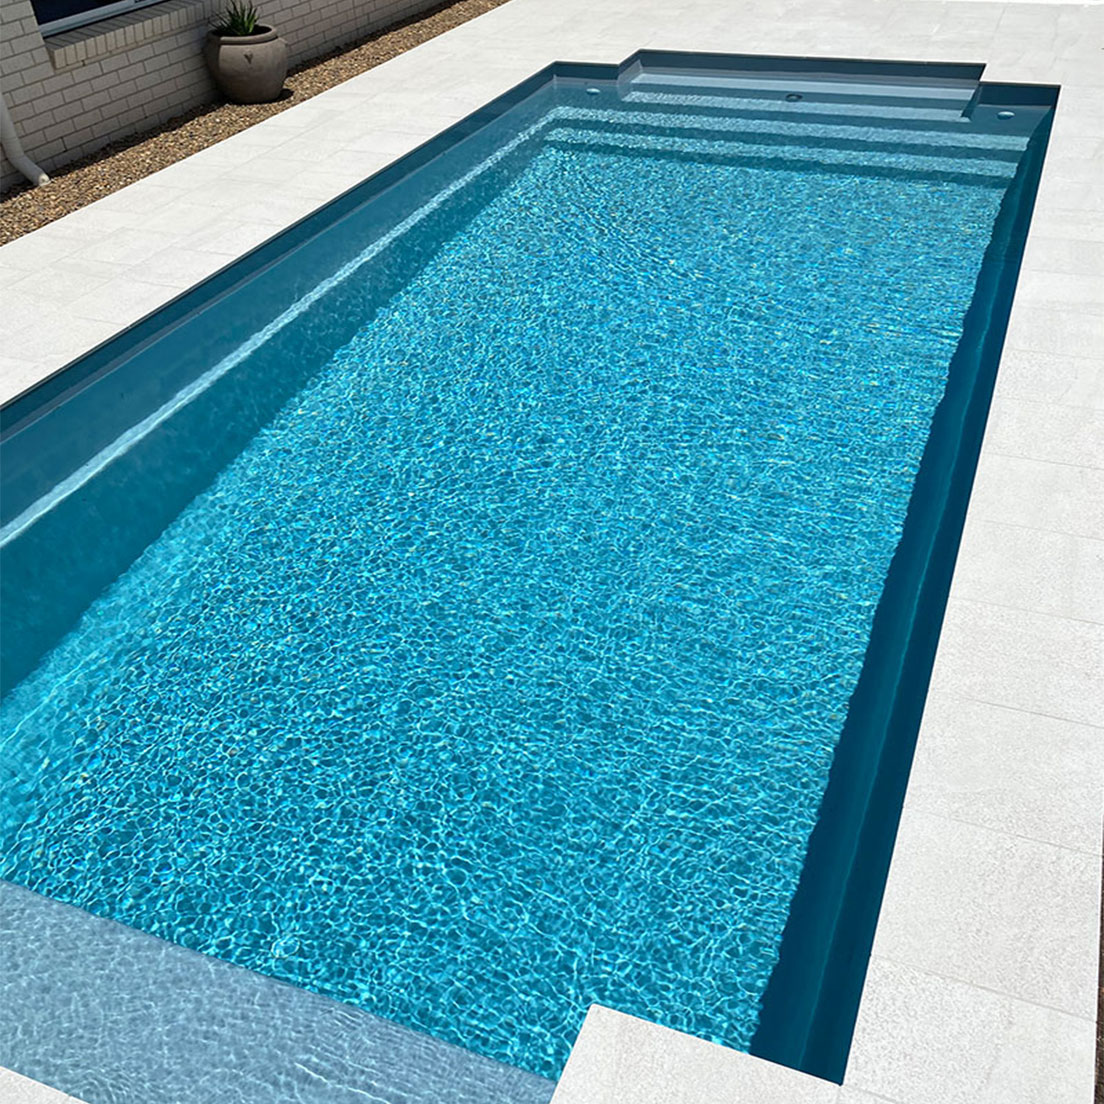 Swimming Pool with White Tiles